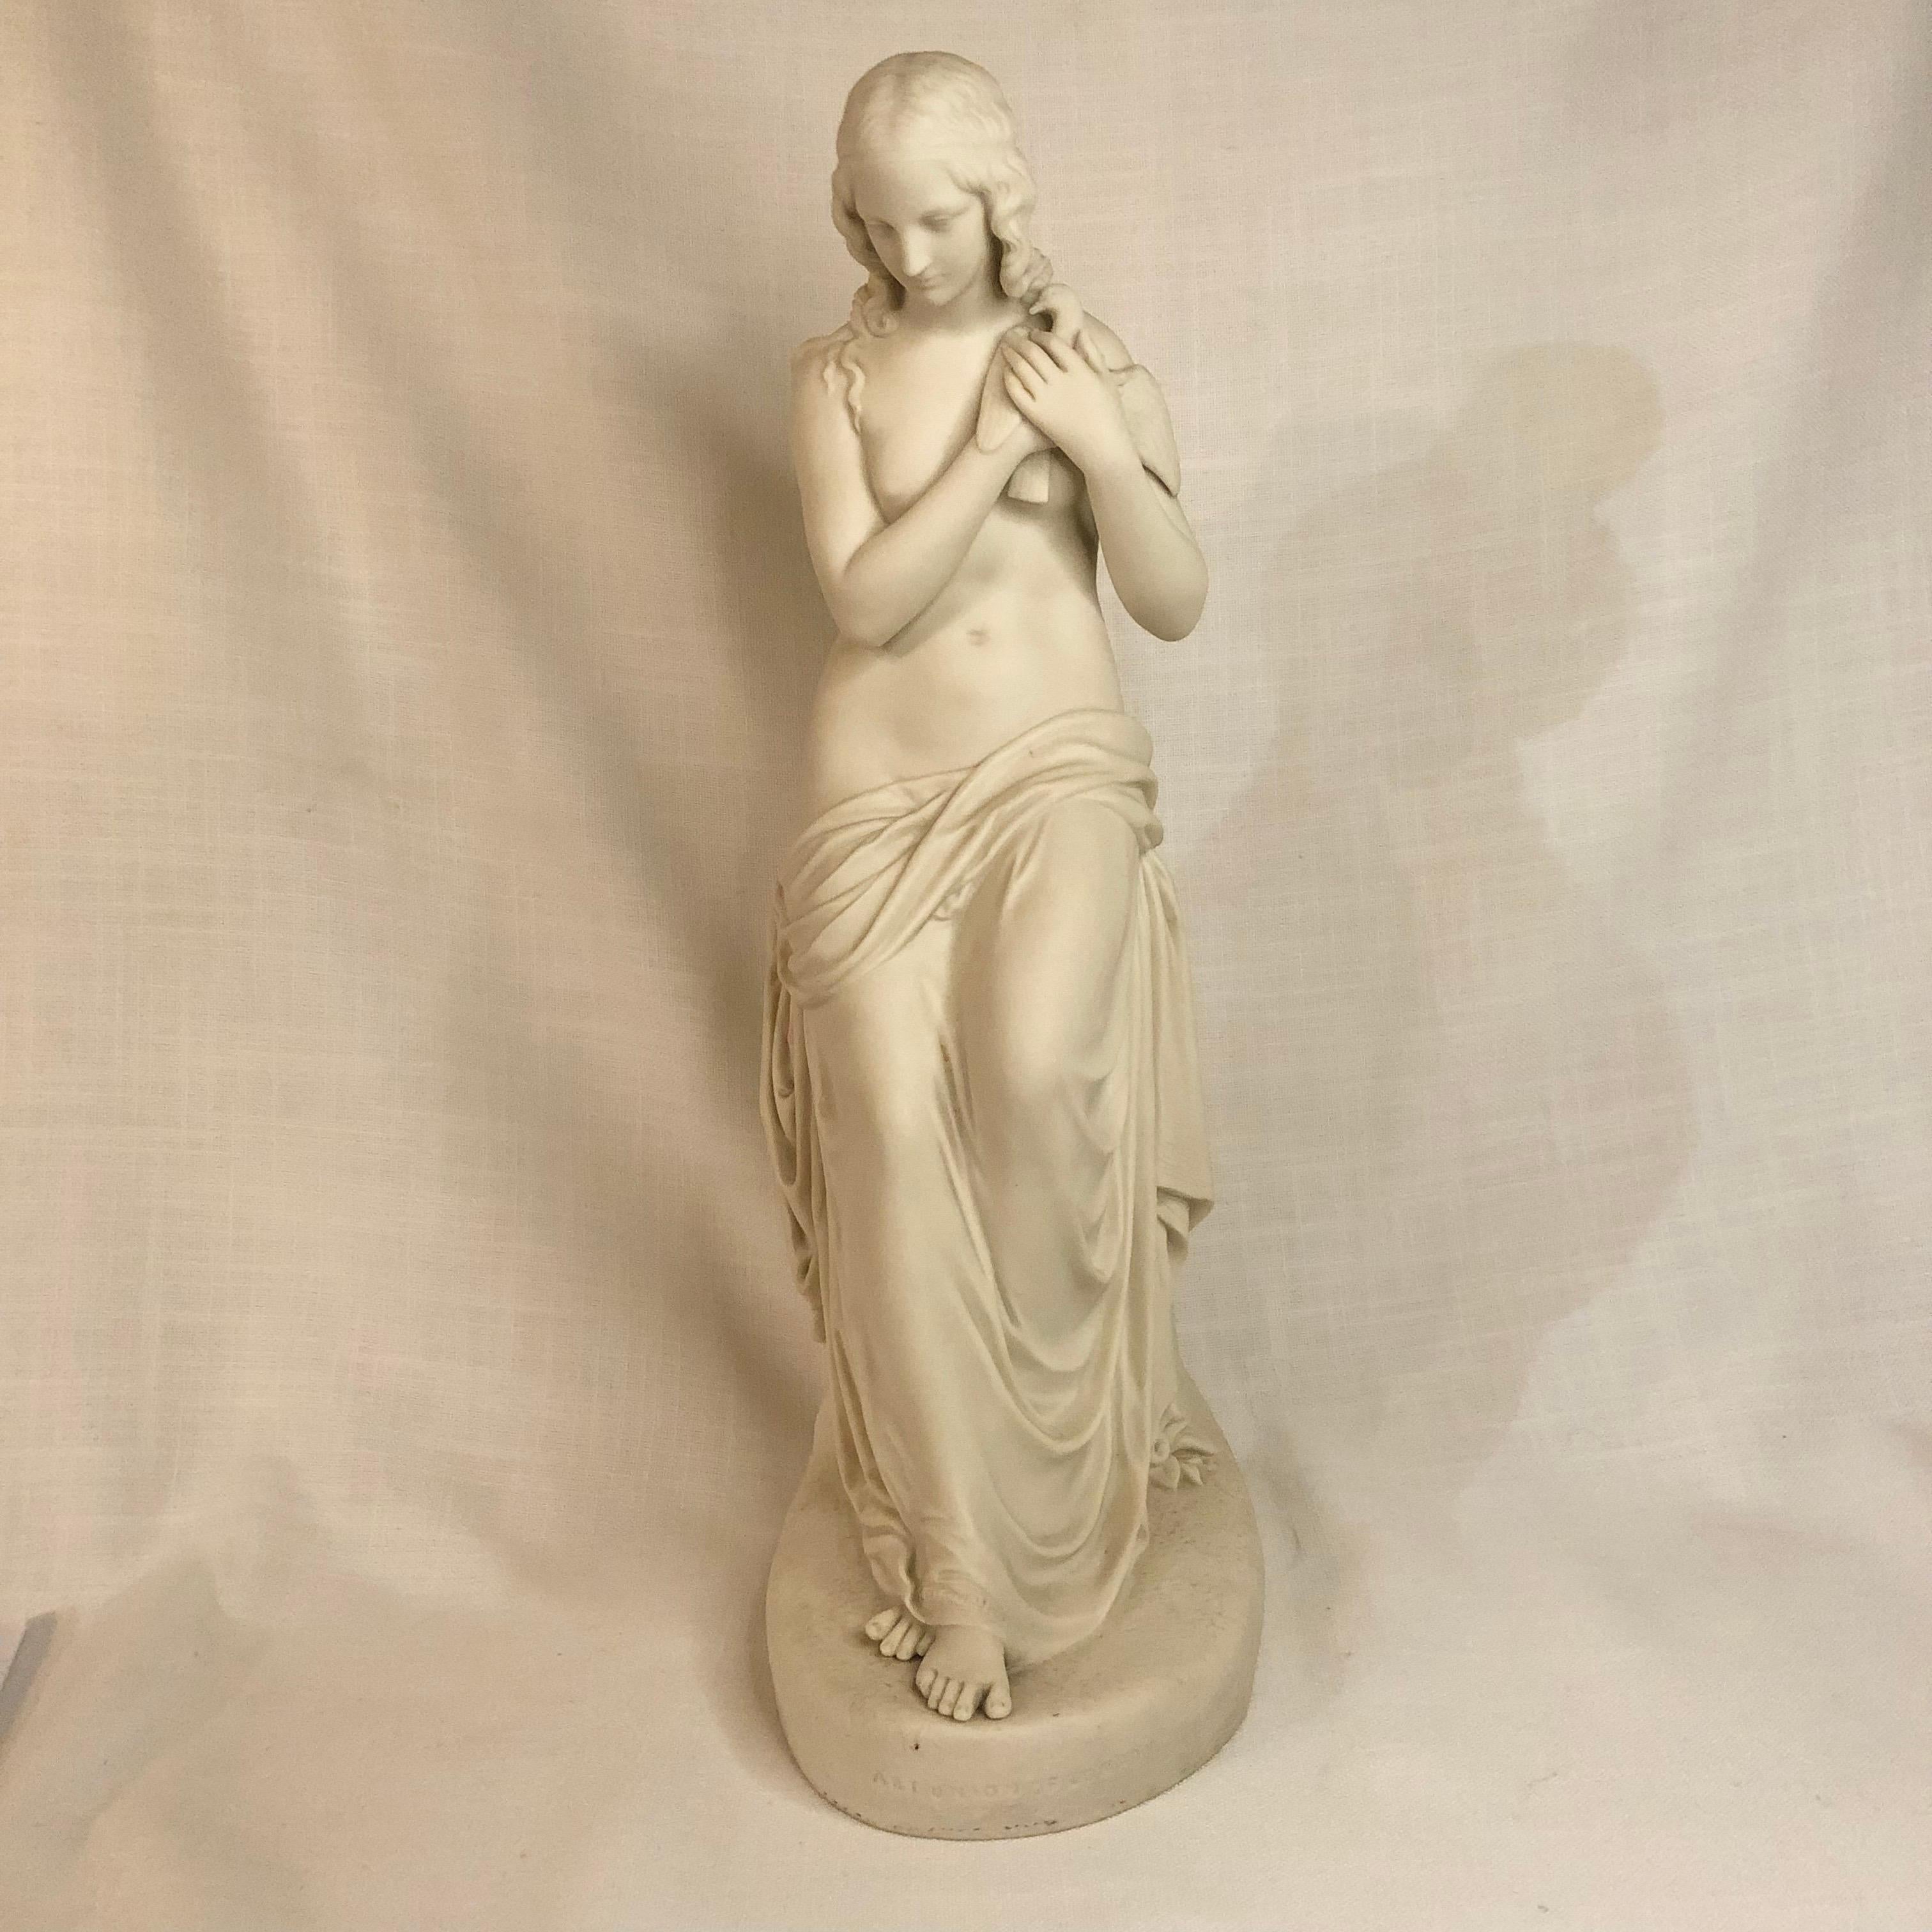 Romantic Tall Copeland Parian Figure of Exquisite Lady Named Innocence Holding a Bird